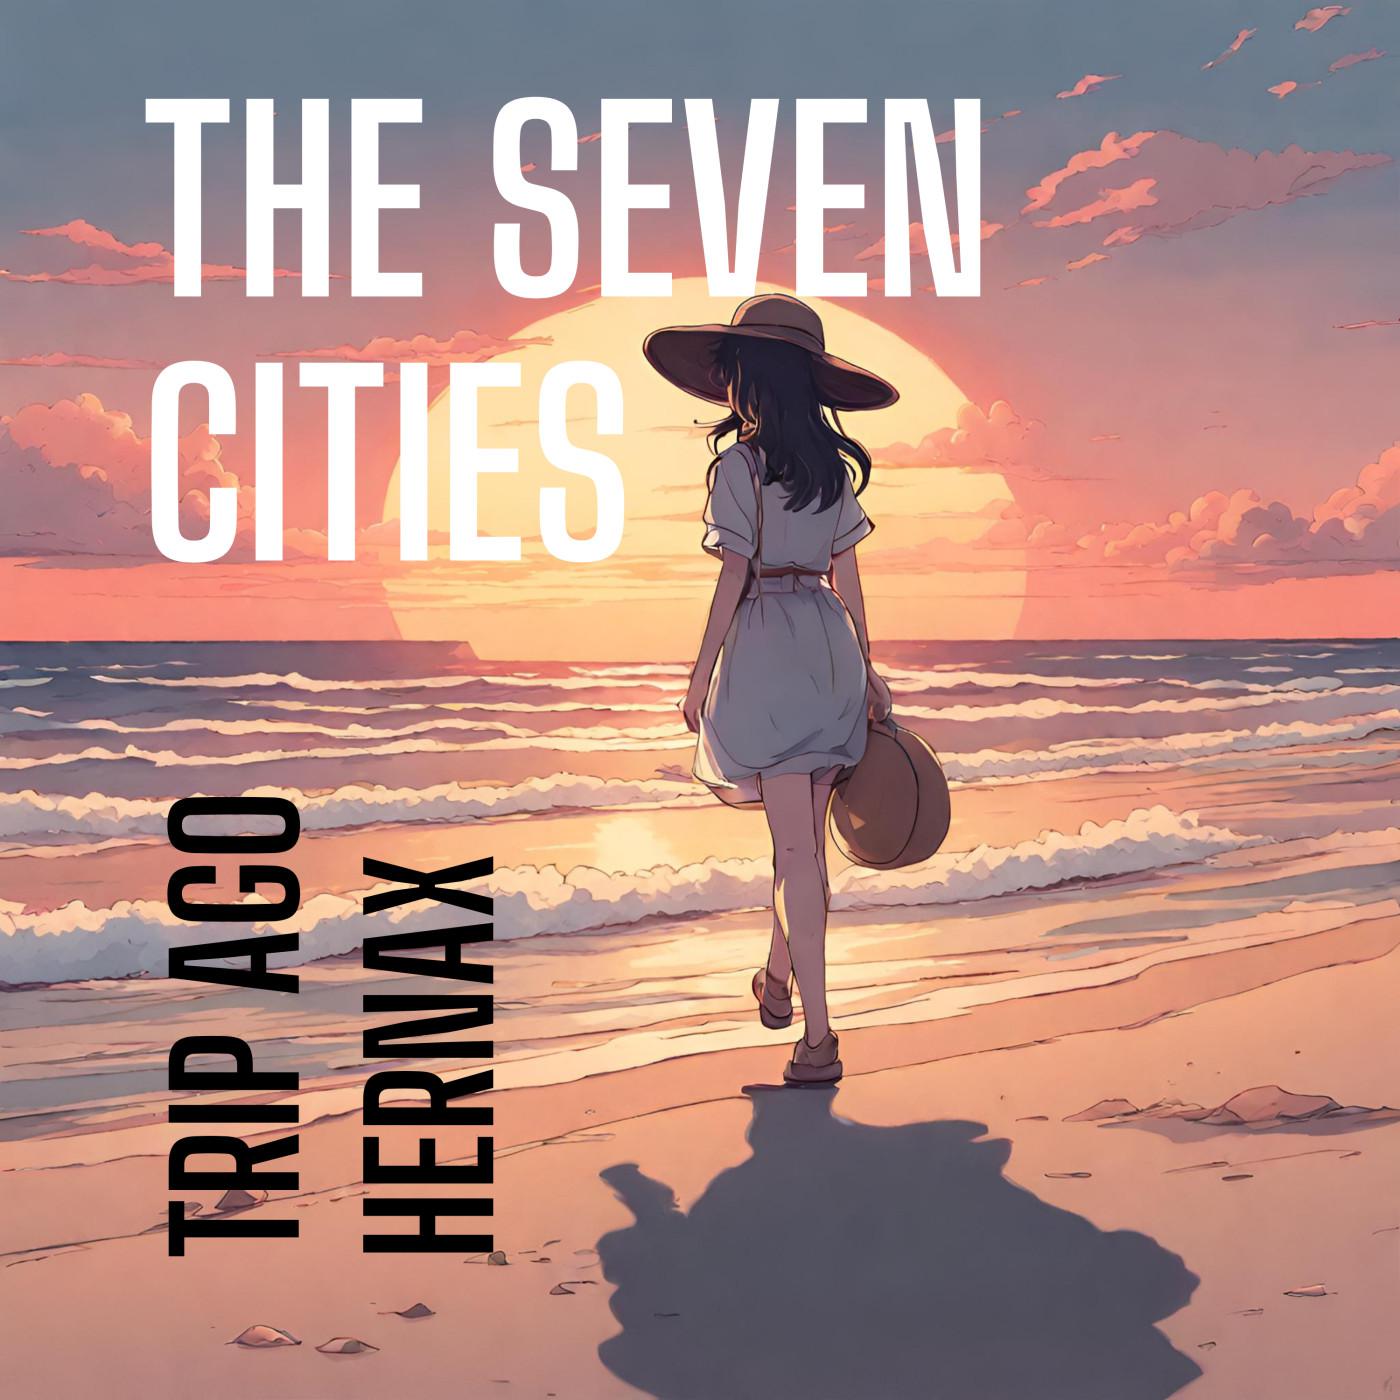 Trip Ago - The Seven Cities (feat. hernax)